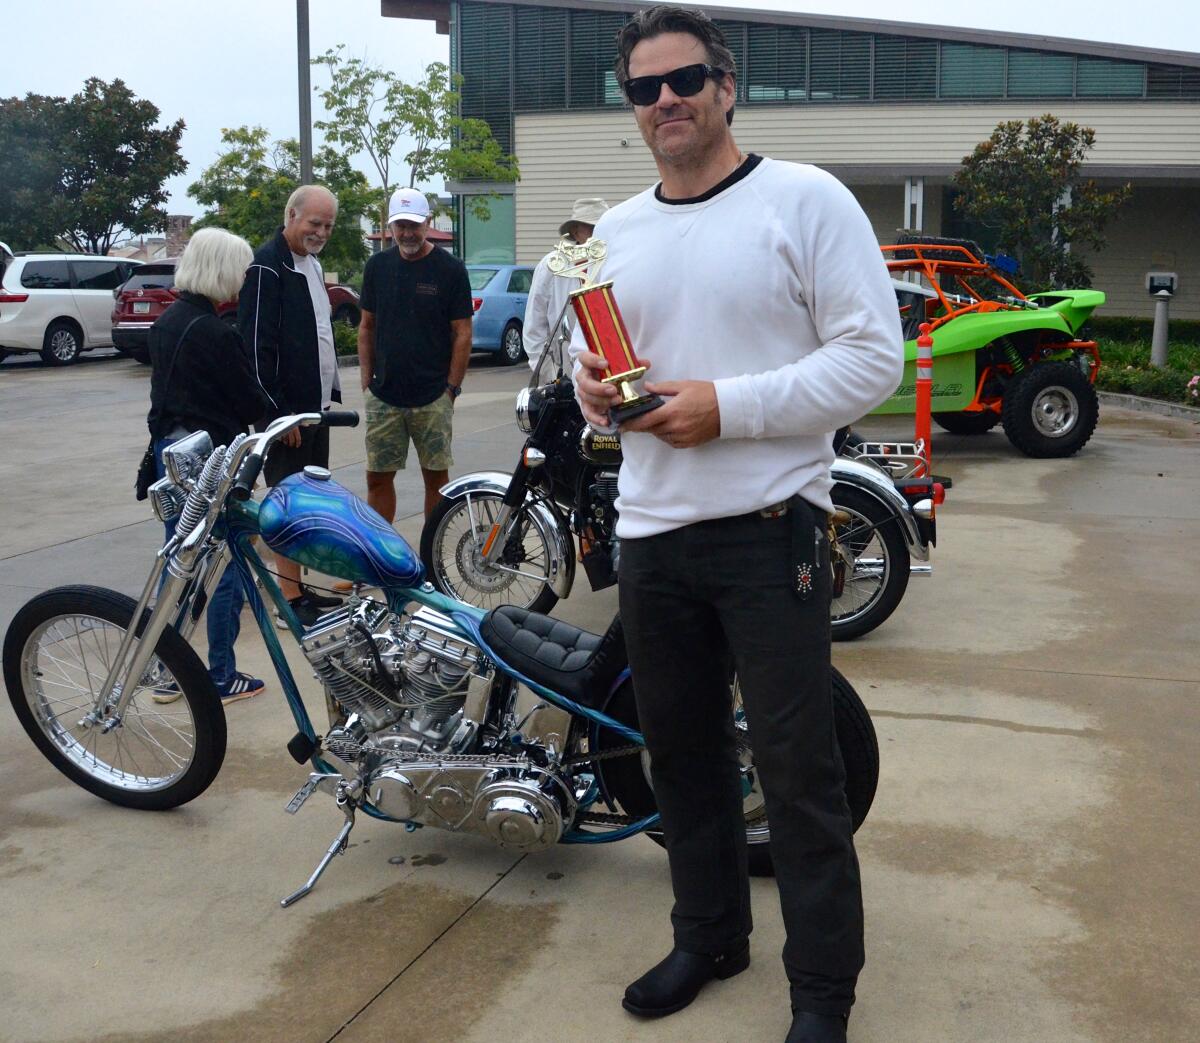 Brian Wilson received Best Motorcycle award for his 1965 Harley Davidson chopper during the OASIS Car Show Saturday.